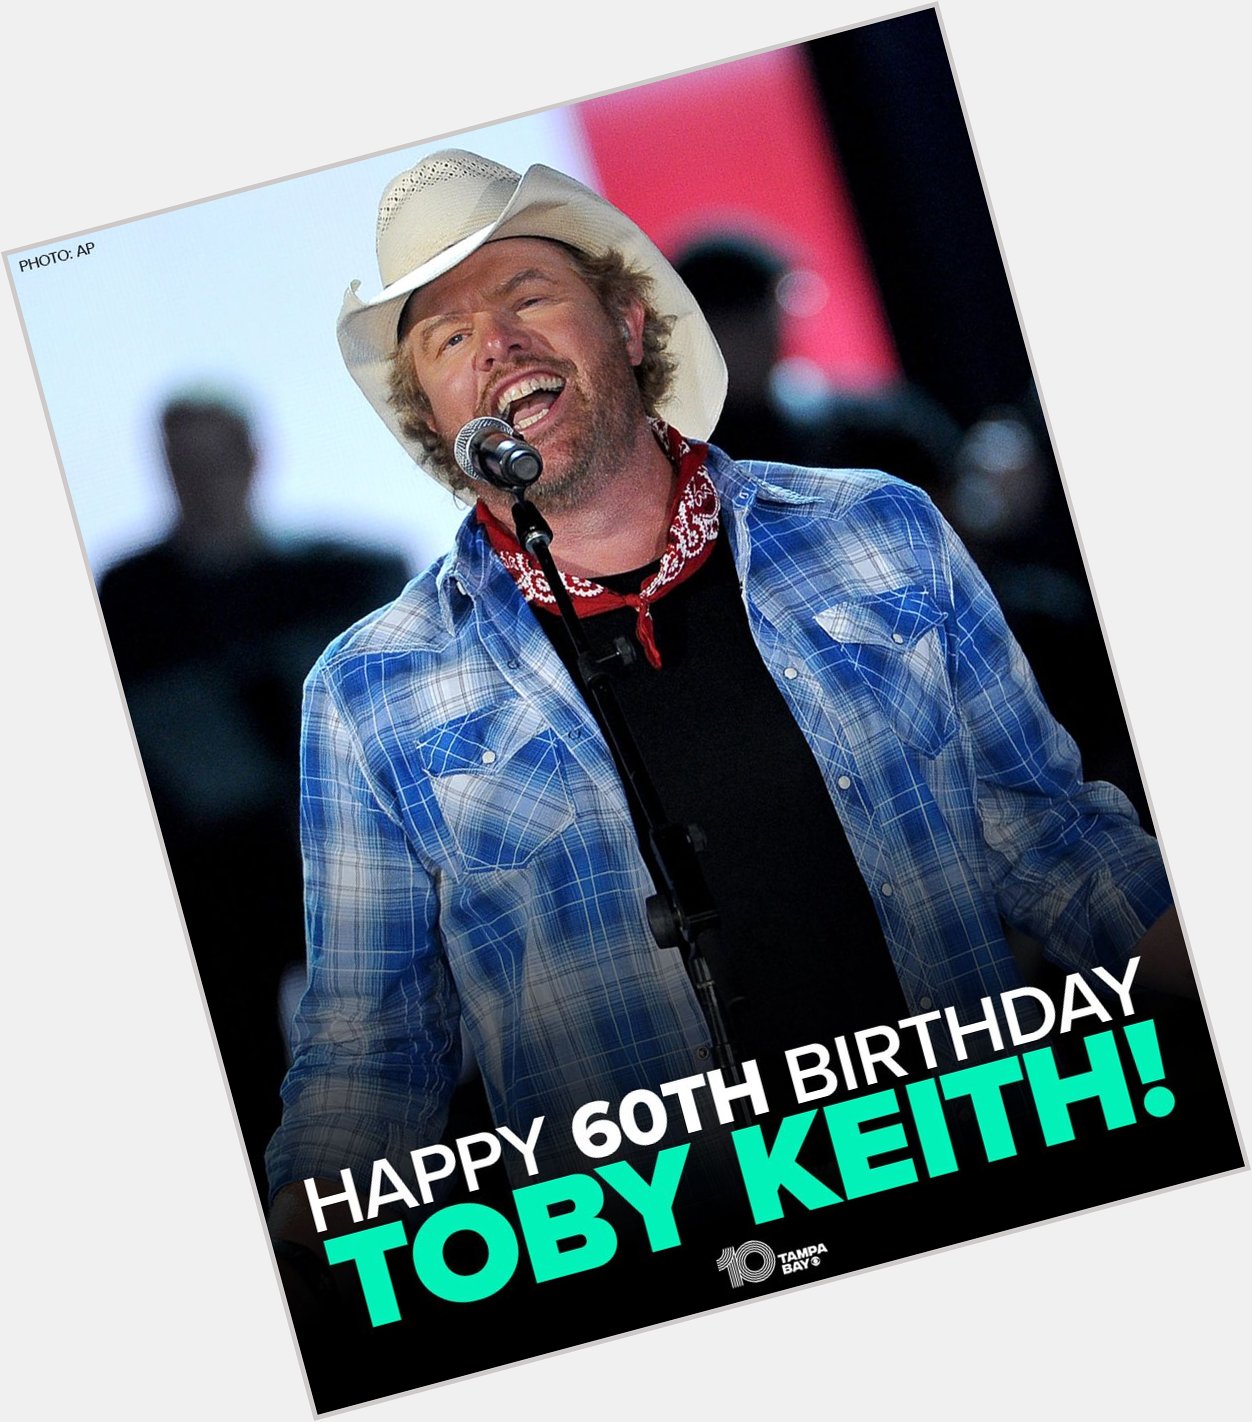 Raise a red solo cup to wish Toby Keith a very happy 60th birthday!! 